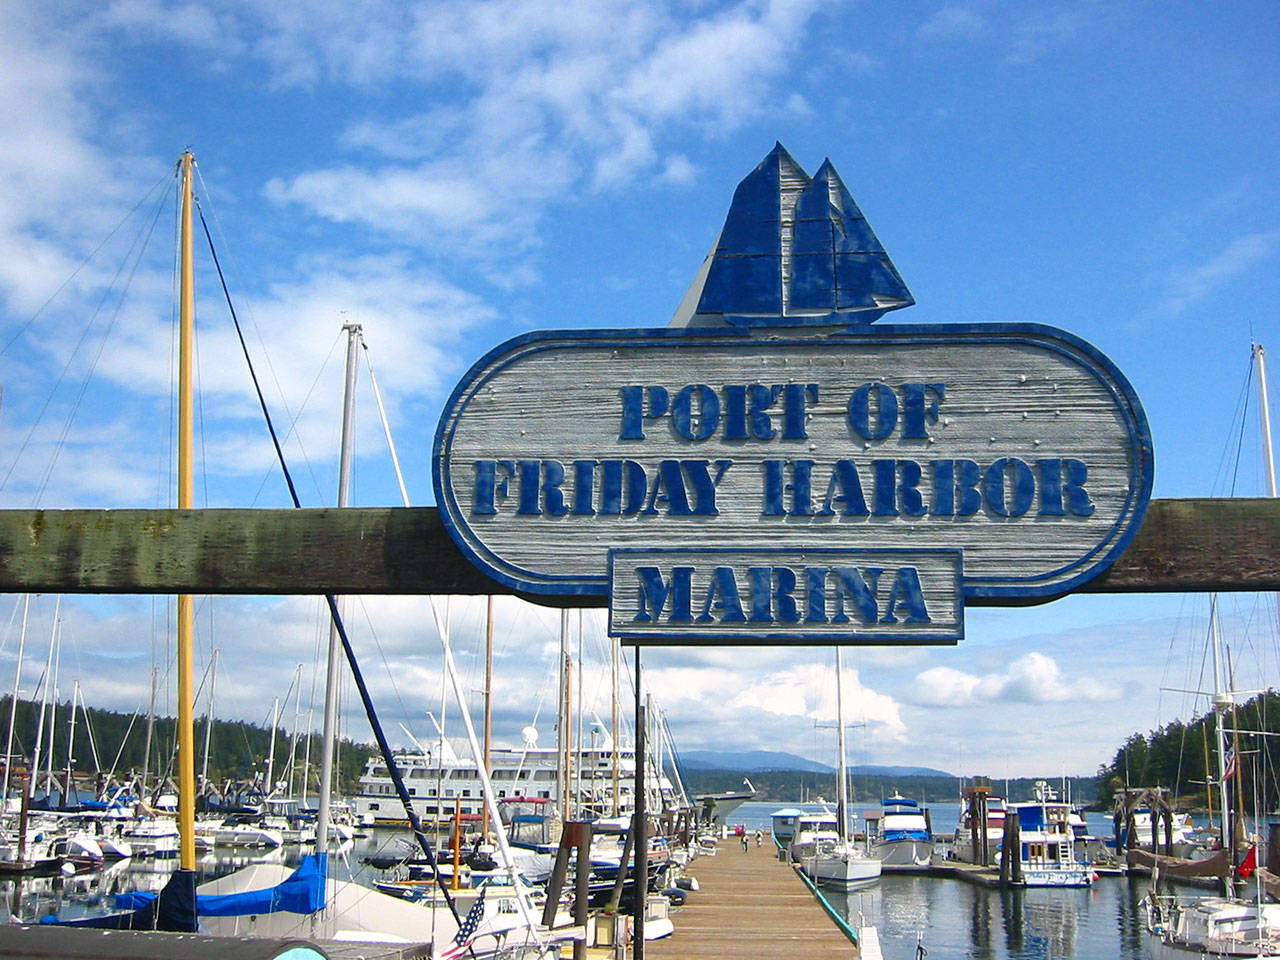 Port of Friday Harbor meeting on April 12